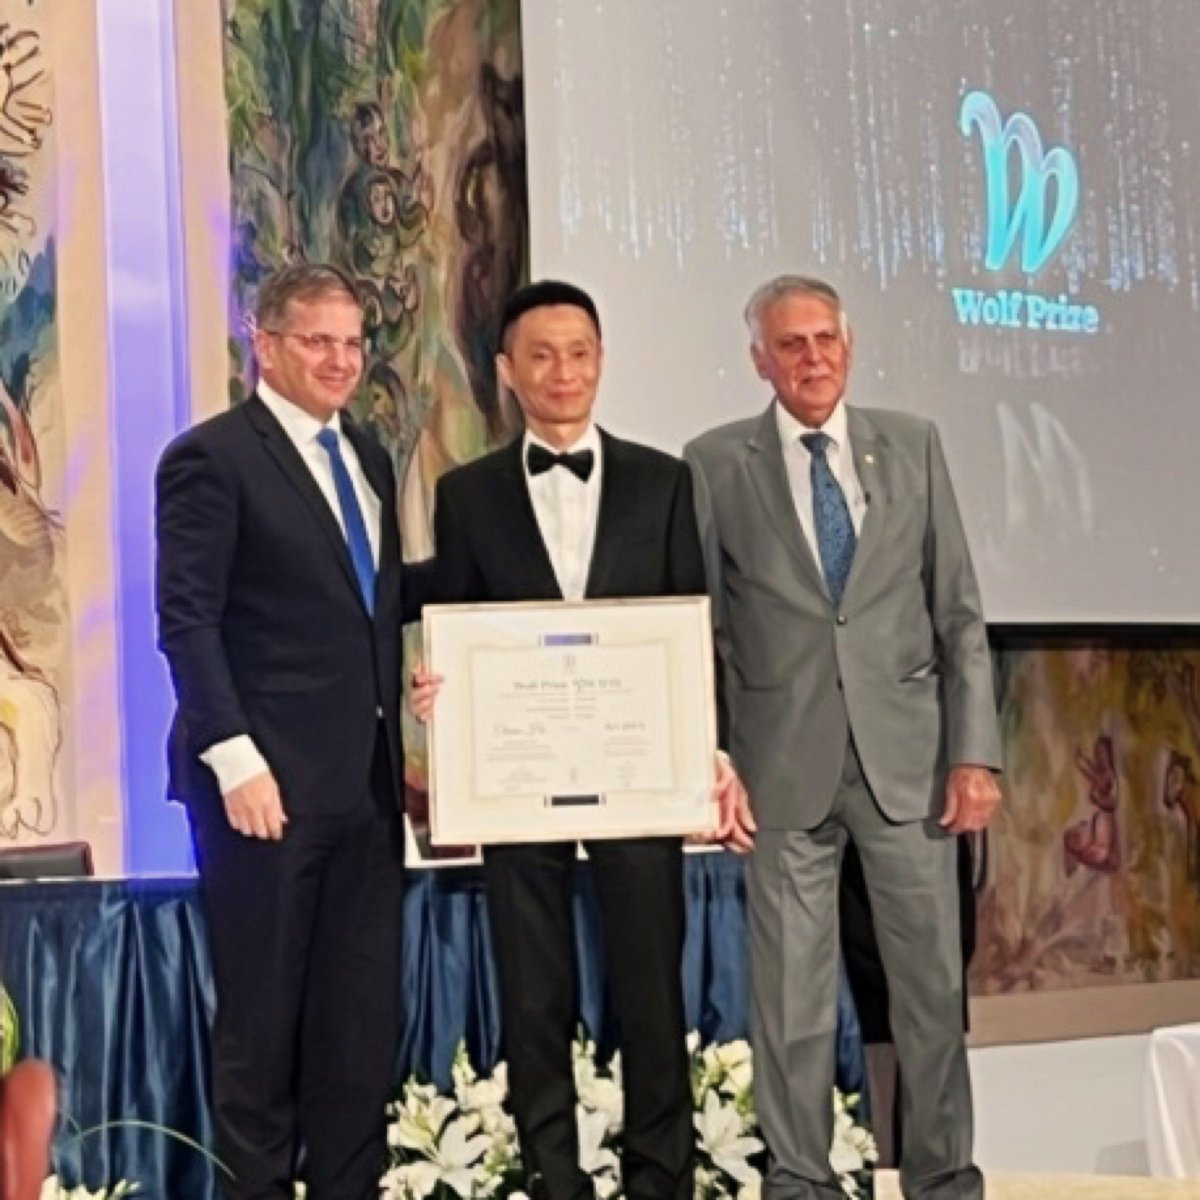 Last night, @UChicago Professor Chuan He was awarded the Wolf Prize for Chemistry at a ceremony held at the Knesset in Israel. Considered one of the most prestigious awards in the world, laureates are selected each year by an international jury of world-renowned professionals.